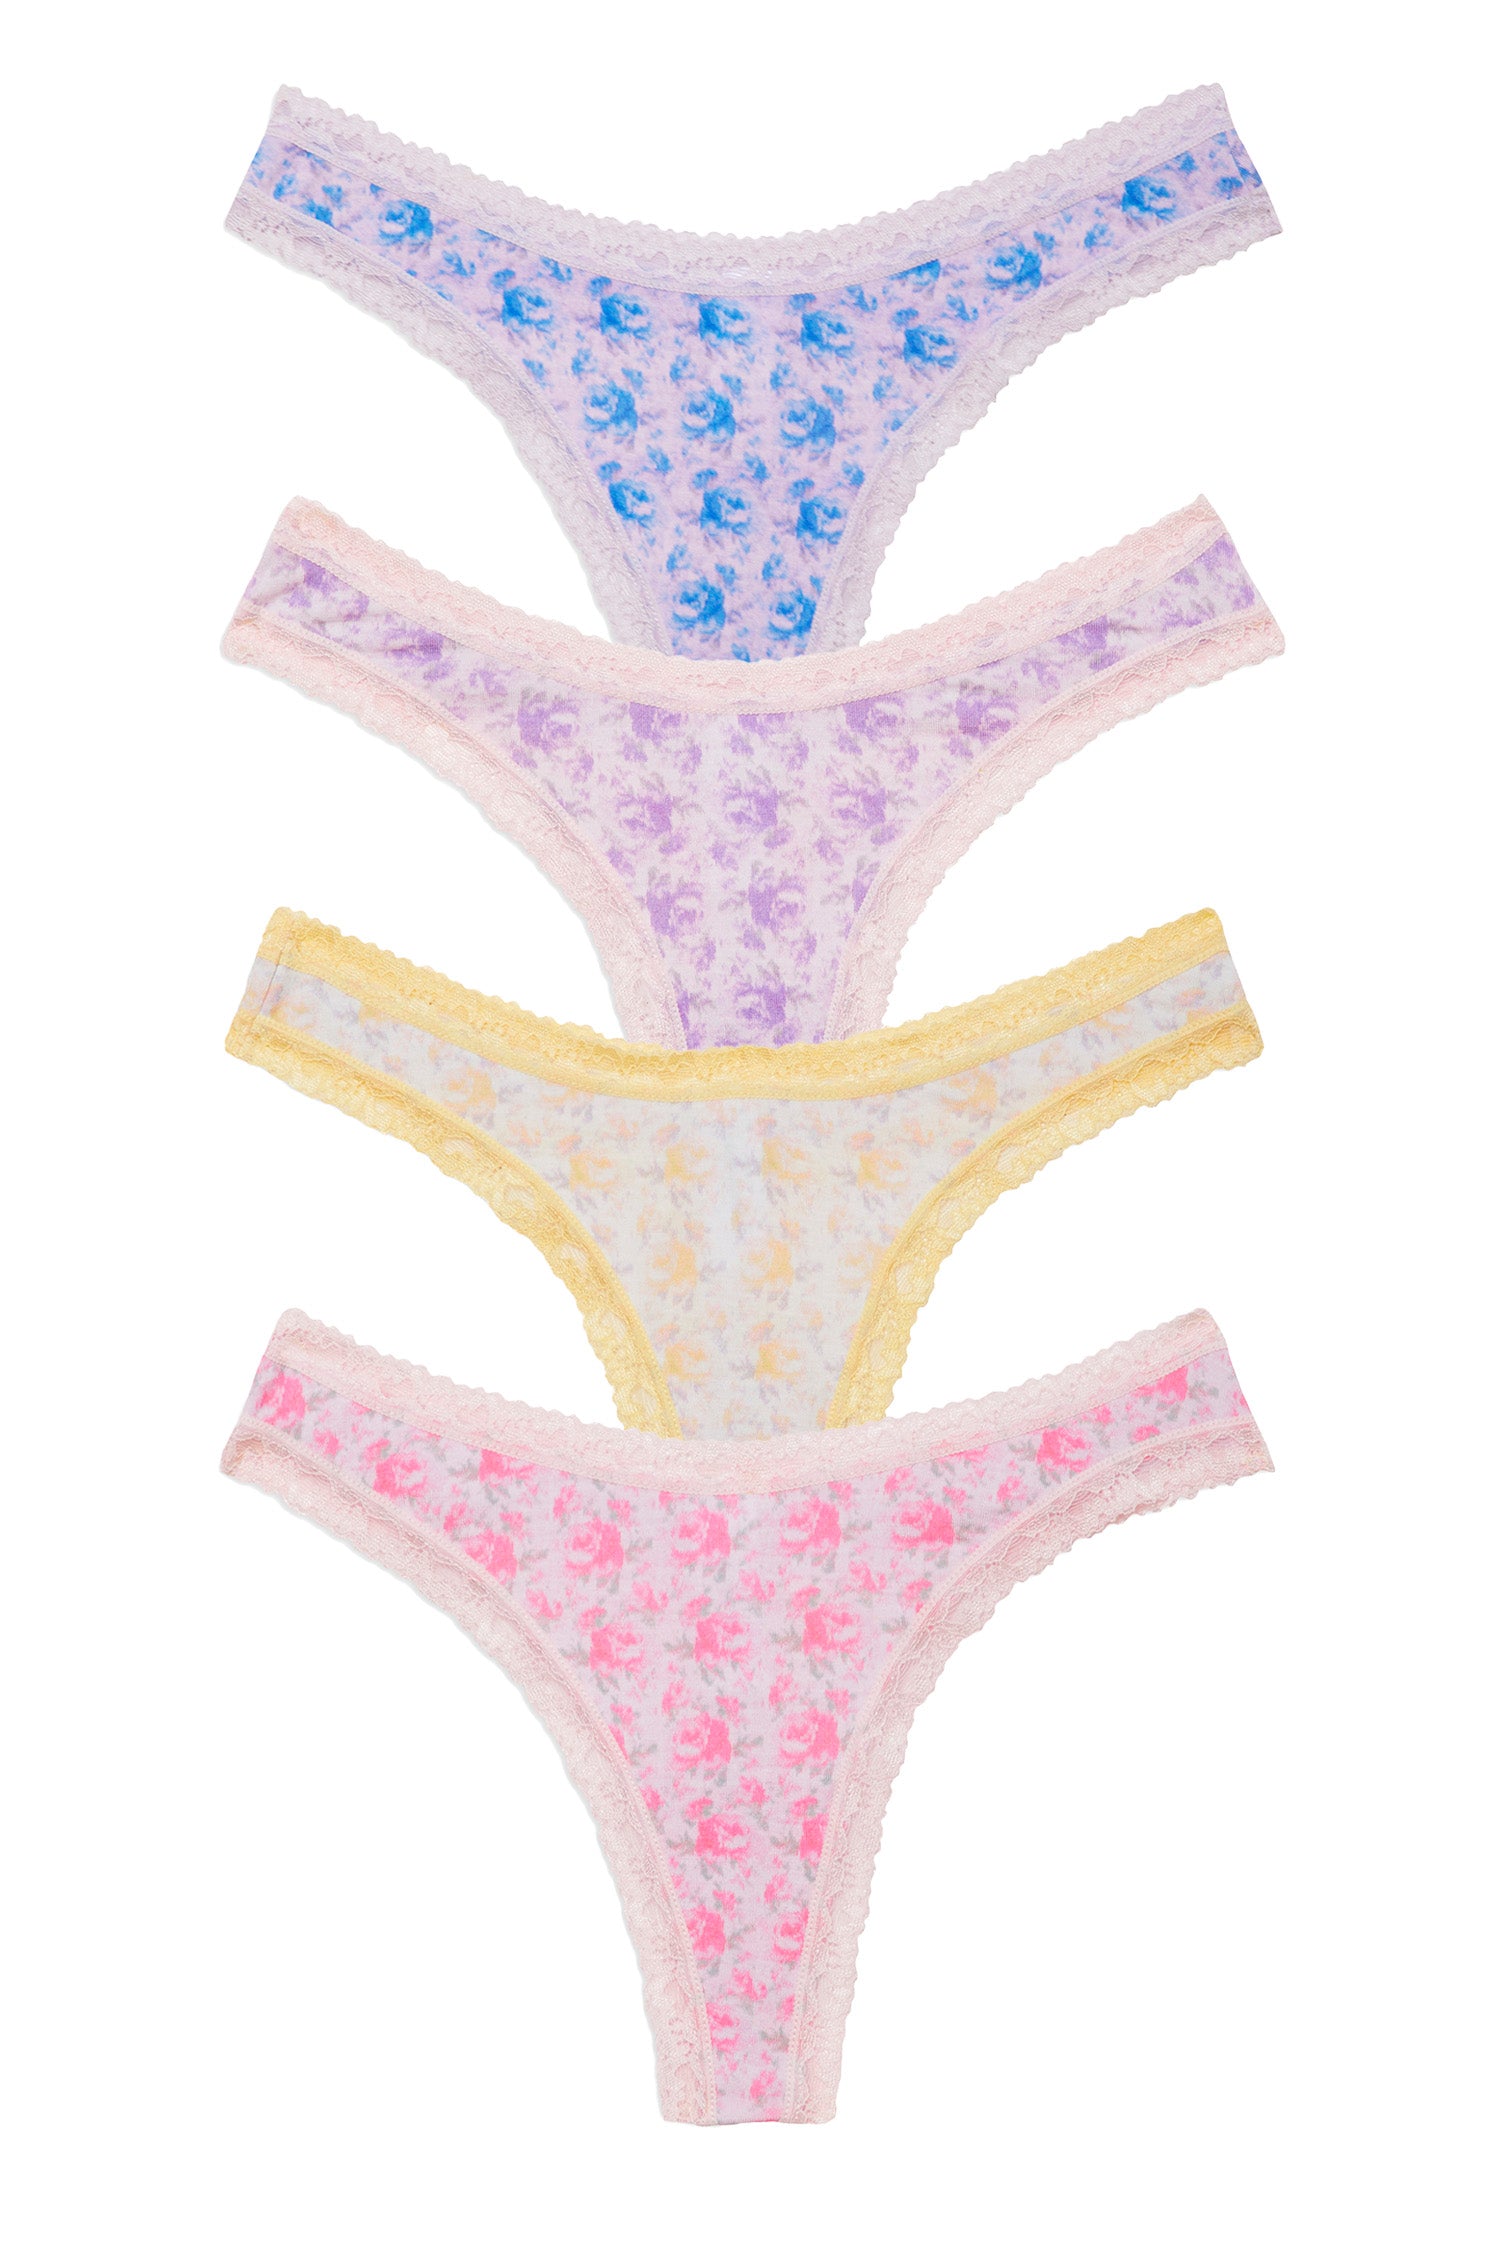 Vibrant Floral Print 4 Pack Thong Box - Women's Underwear & Intimates